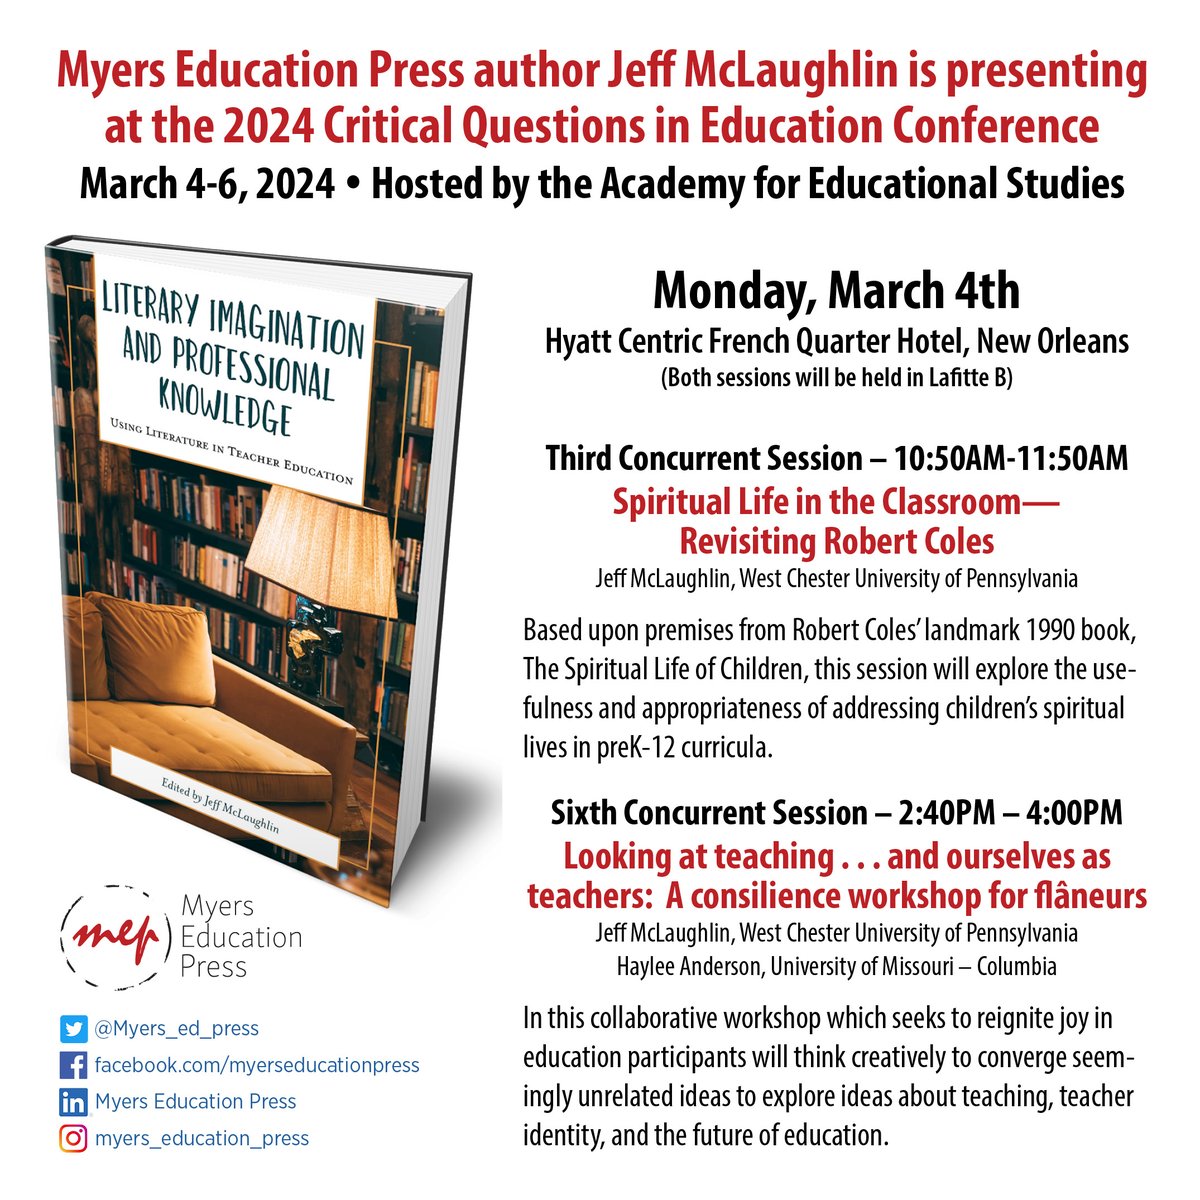 Jeff McLaughlin, editor of 'Literary Imagination and Professional Knowledge' will be presenting at two sessions on March 4th at the 2024 Critical Questions in Education Conference in New Orleans. @StudiesAcademy Book details: myersedpress.presswarehouse.com/browse/book/97…